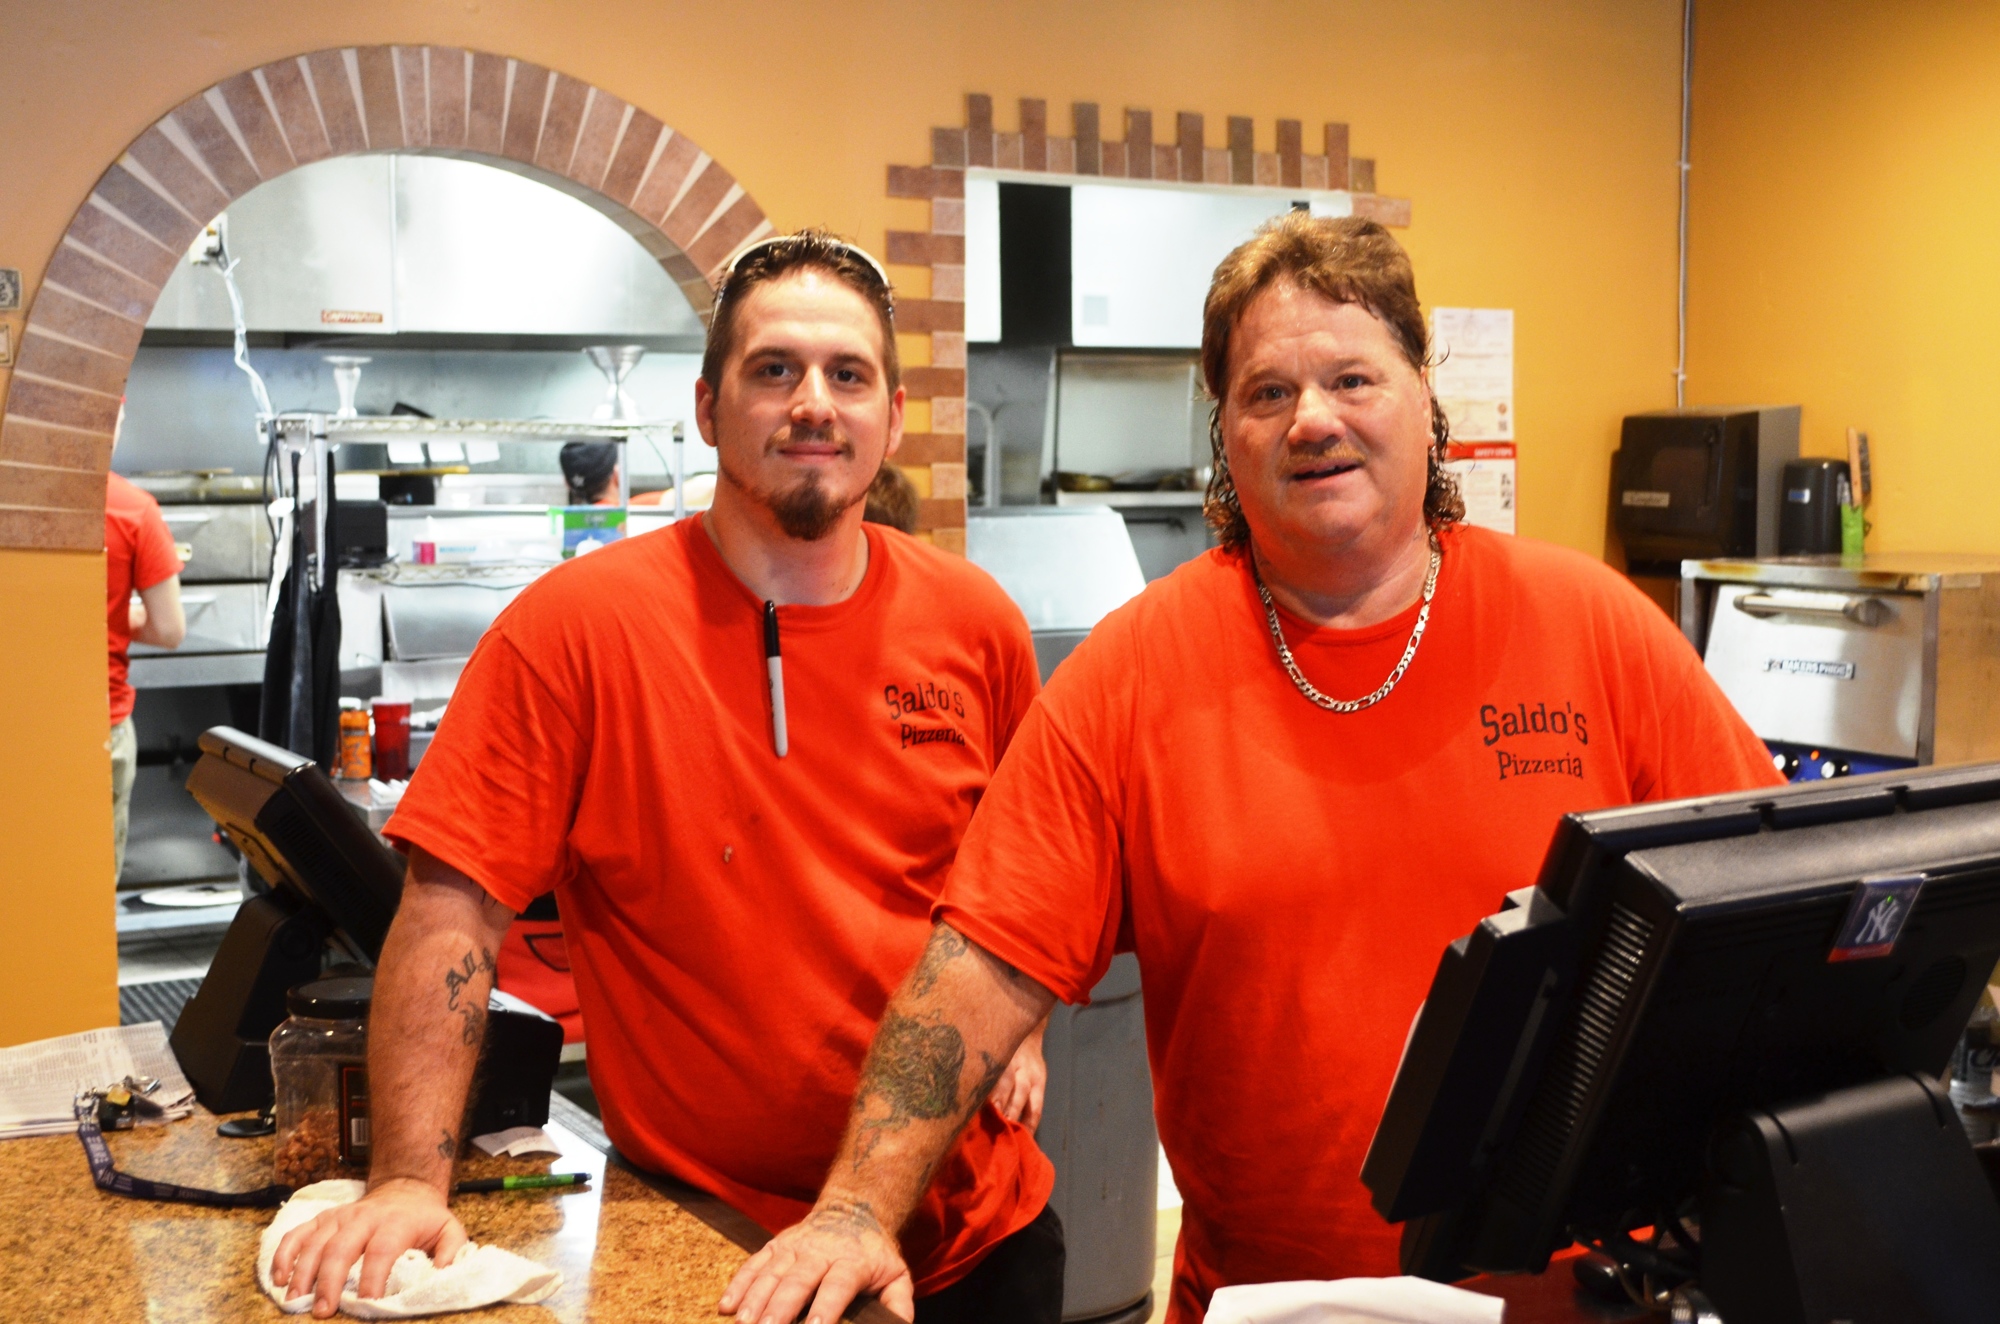 Shawn and his dad, Steve, make authentic New York pizzas at their new restaurant. Shawn’s brother Steve, Jr., will soon join them.